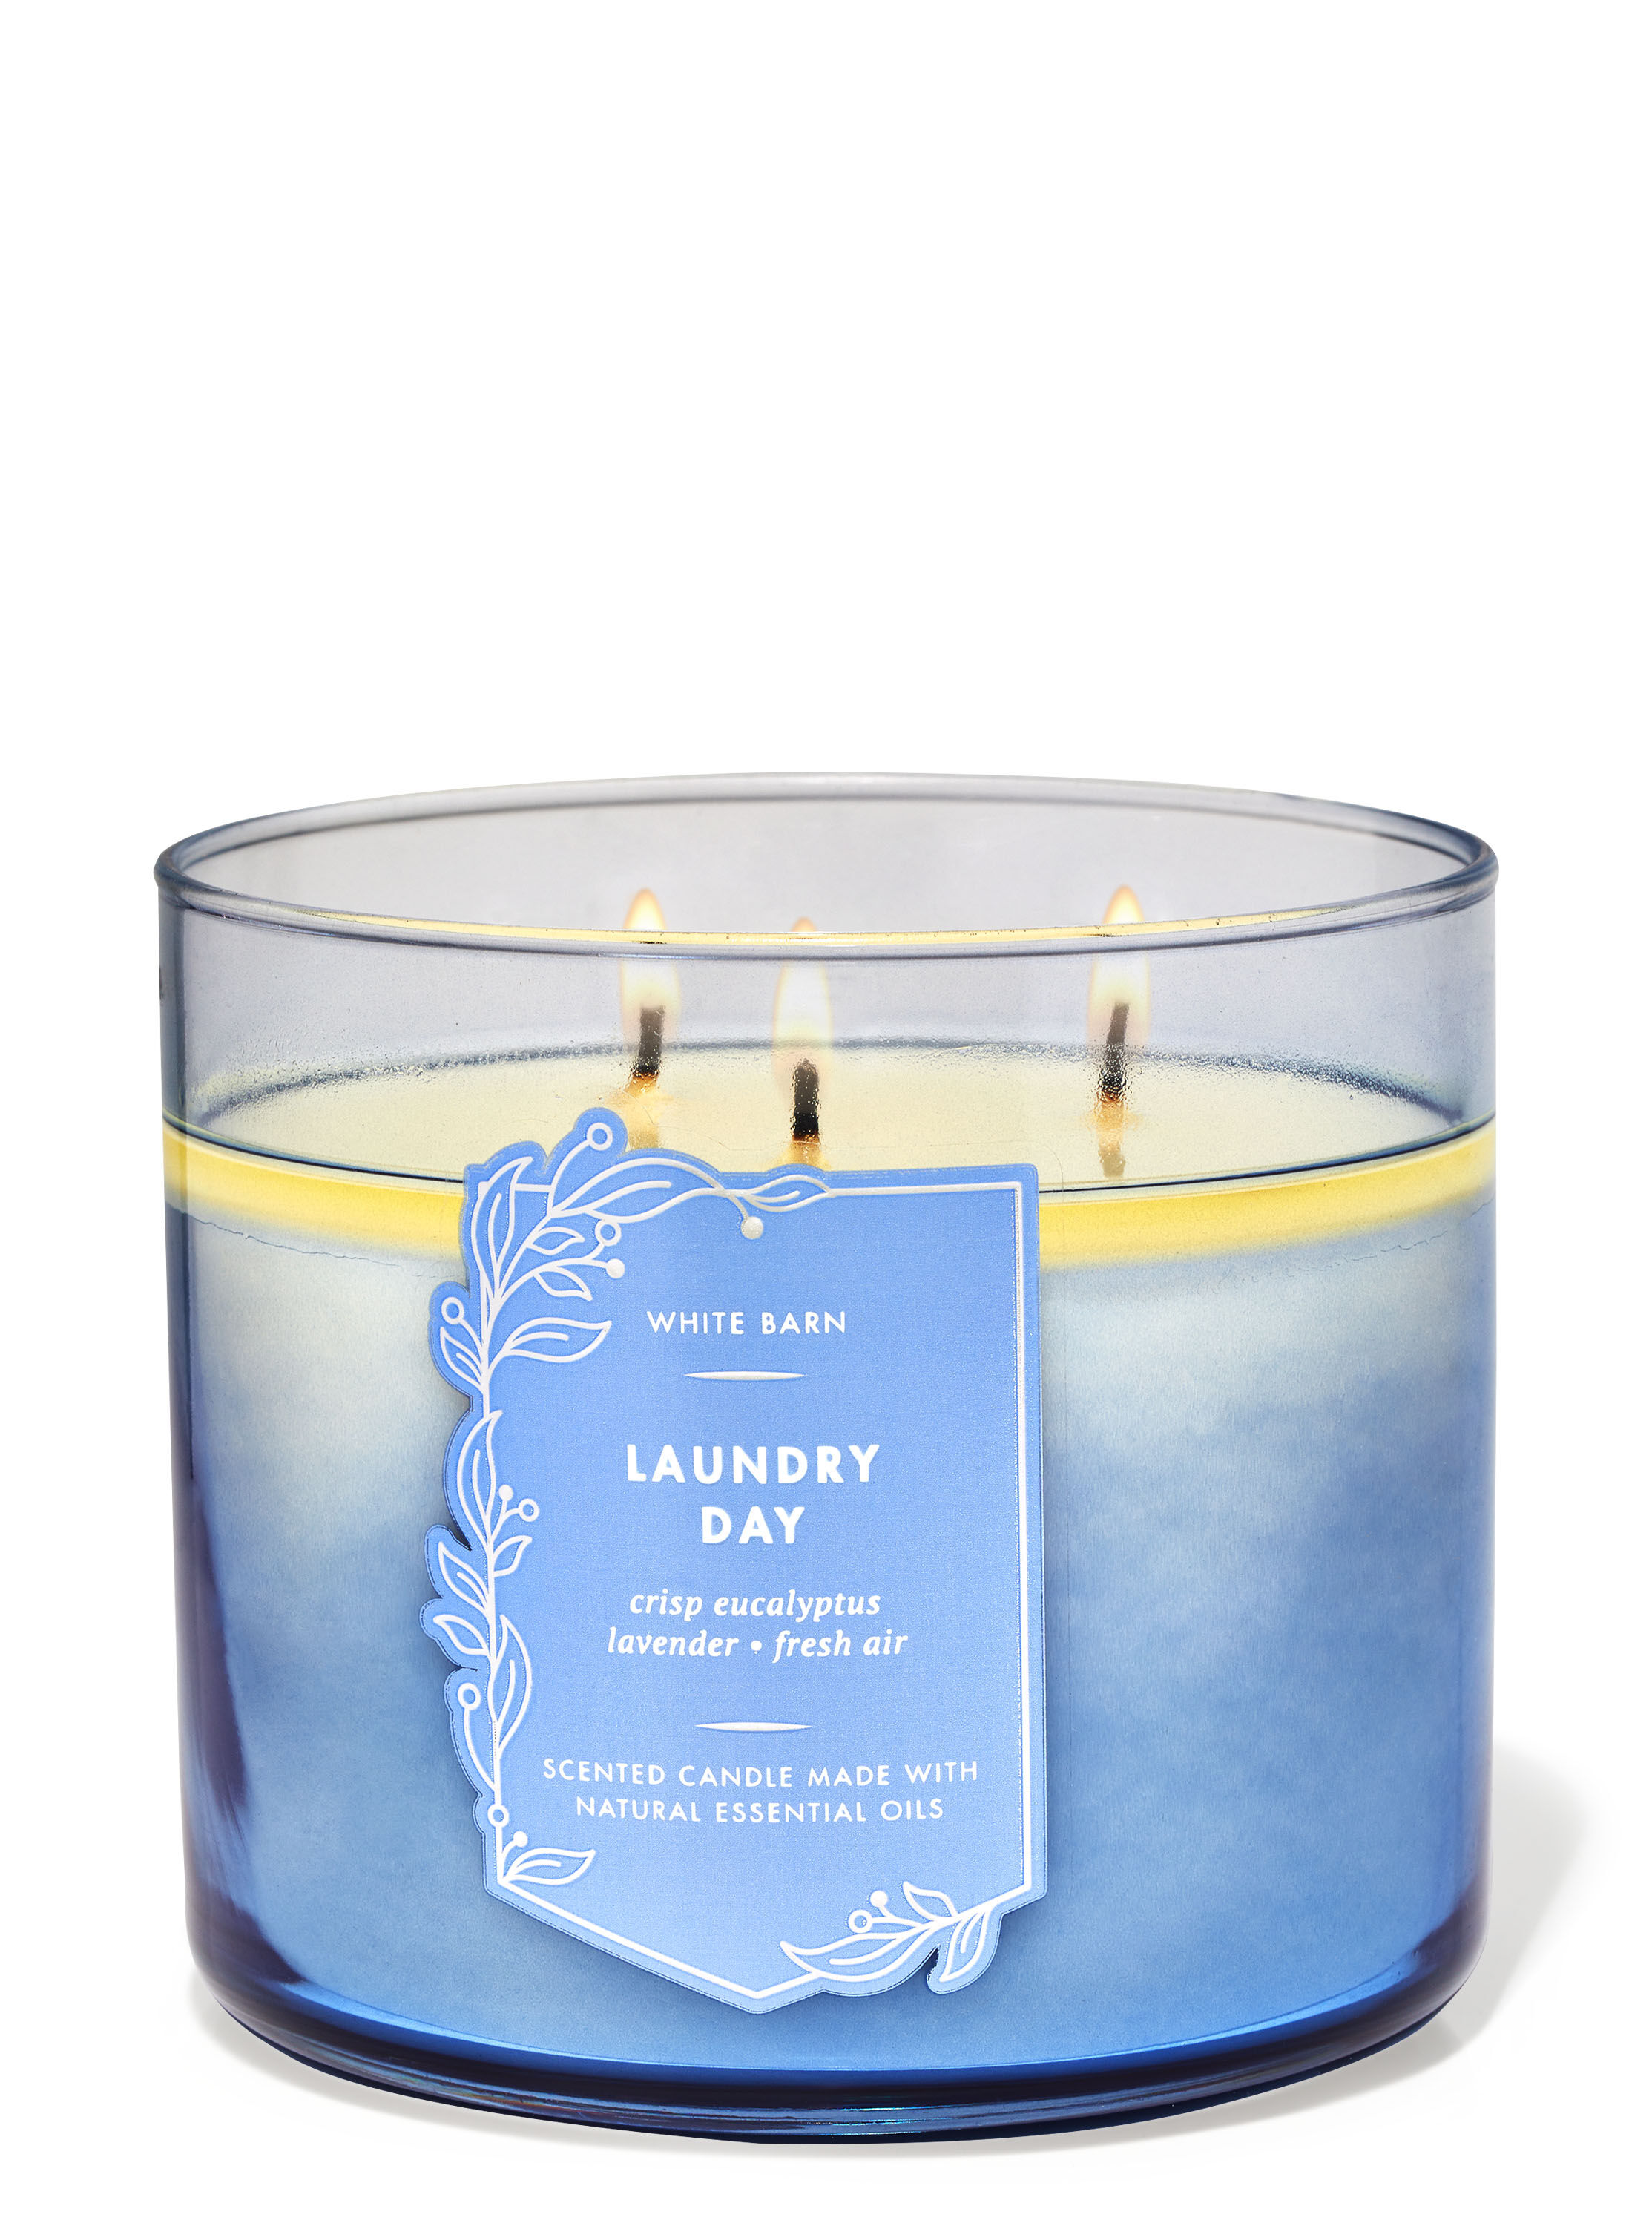 Laundry Day 3-Wick Candle